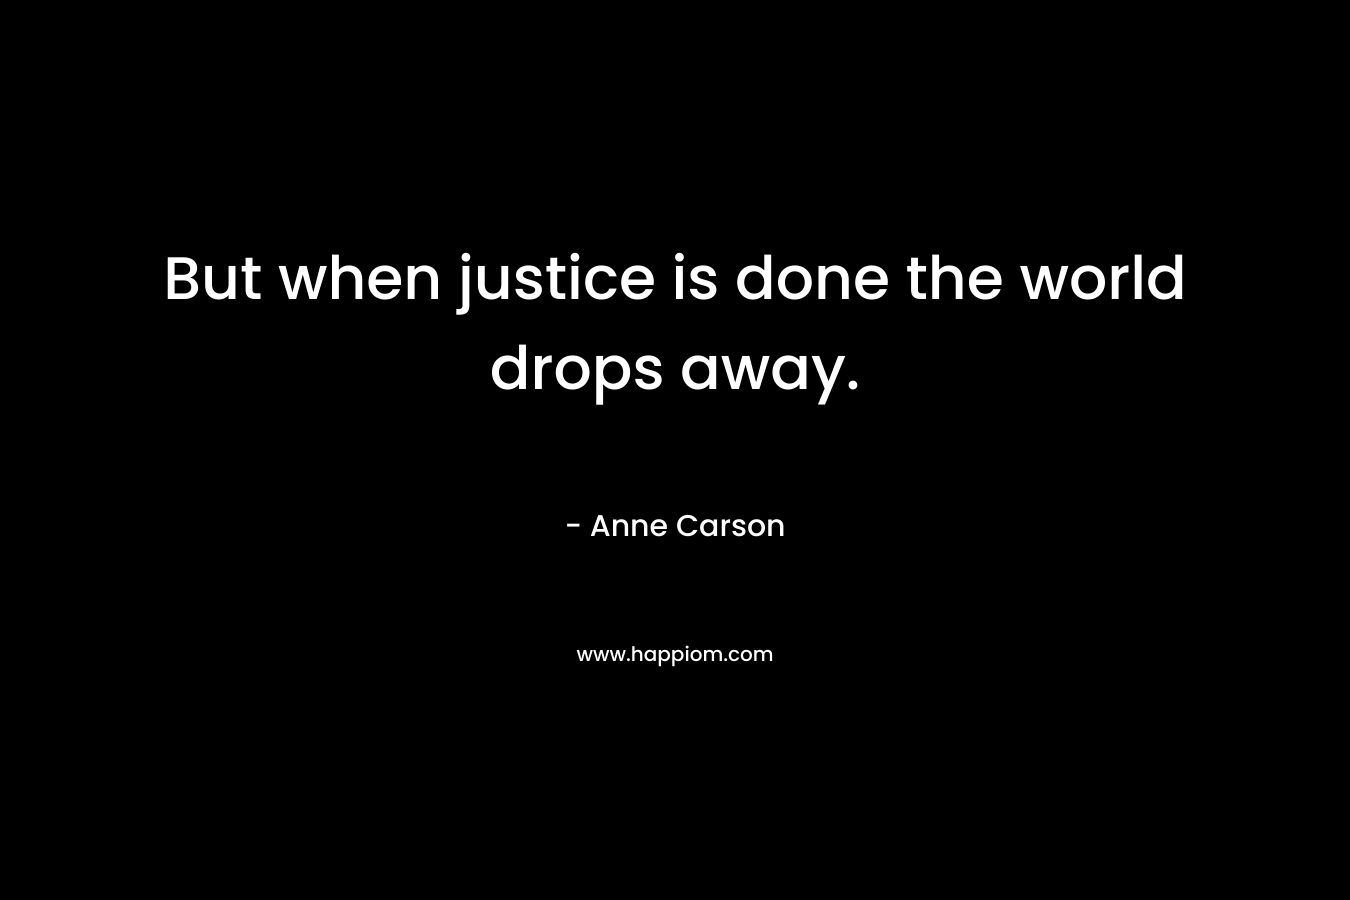 But when justice is done the world drops away.